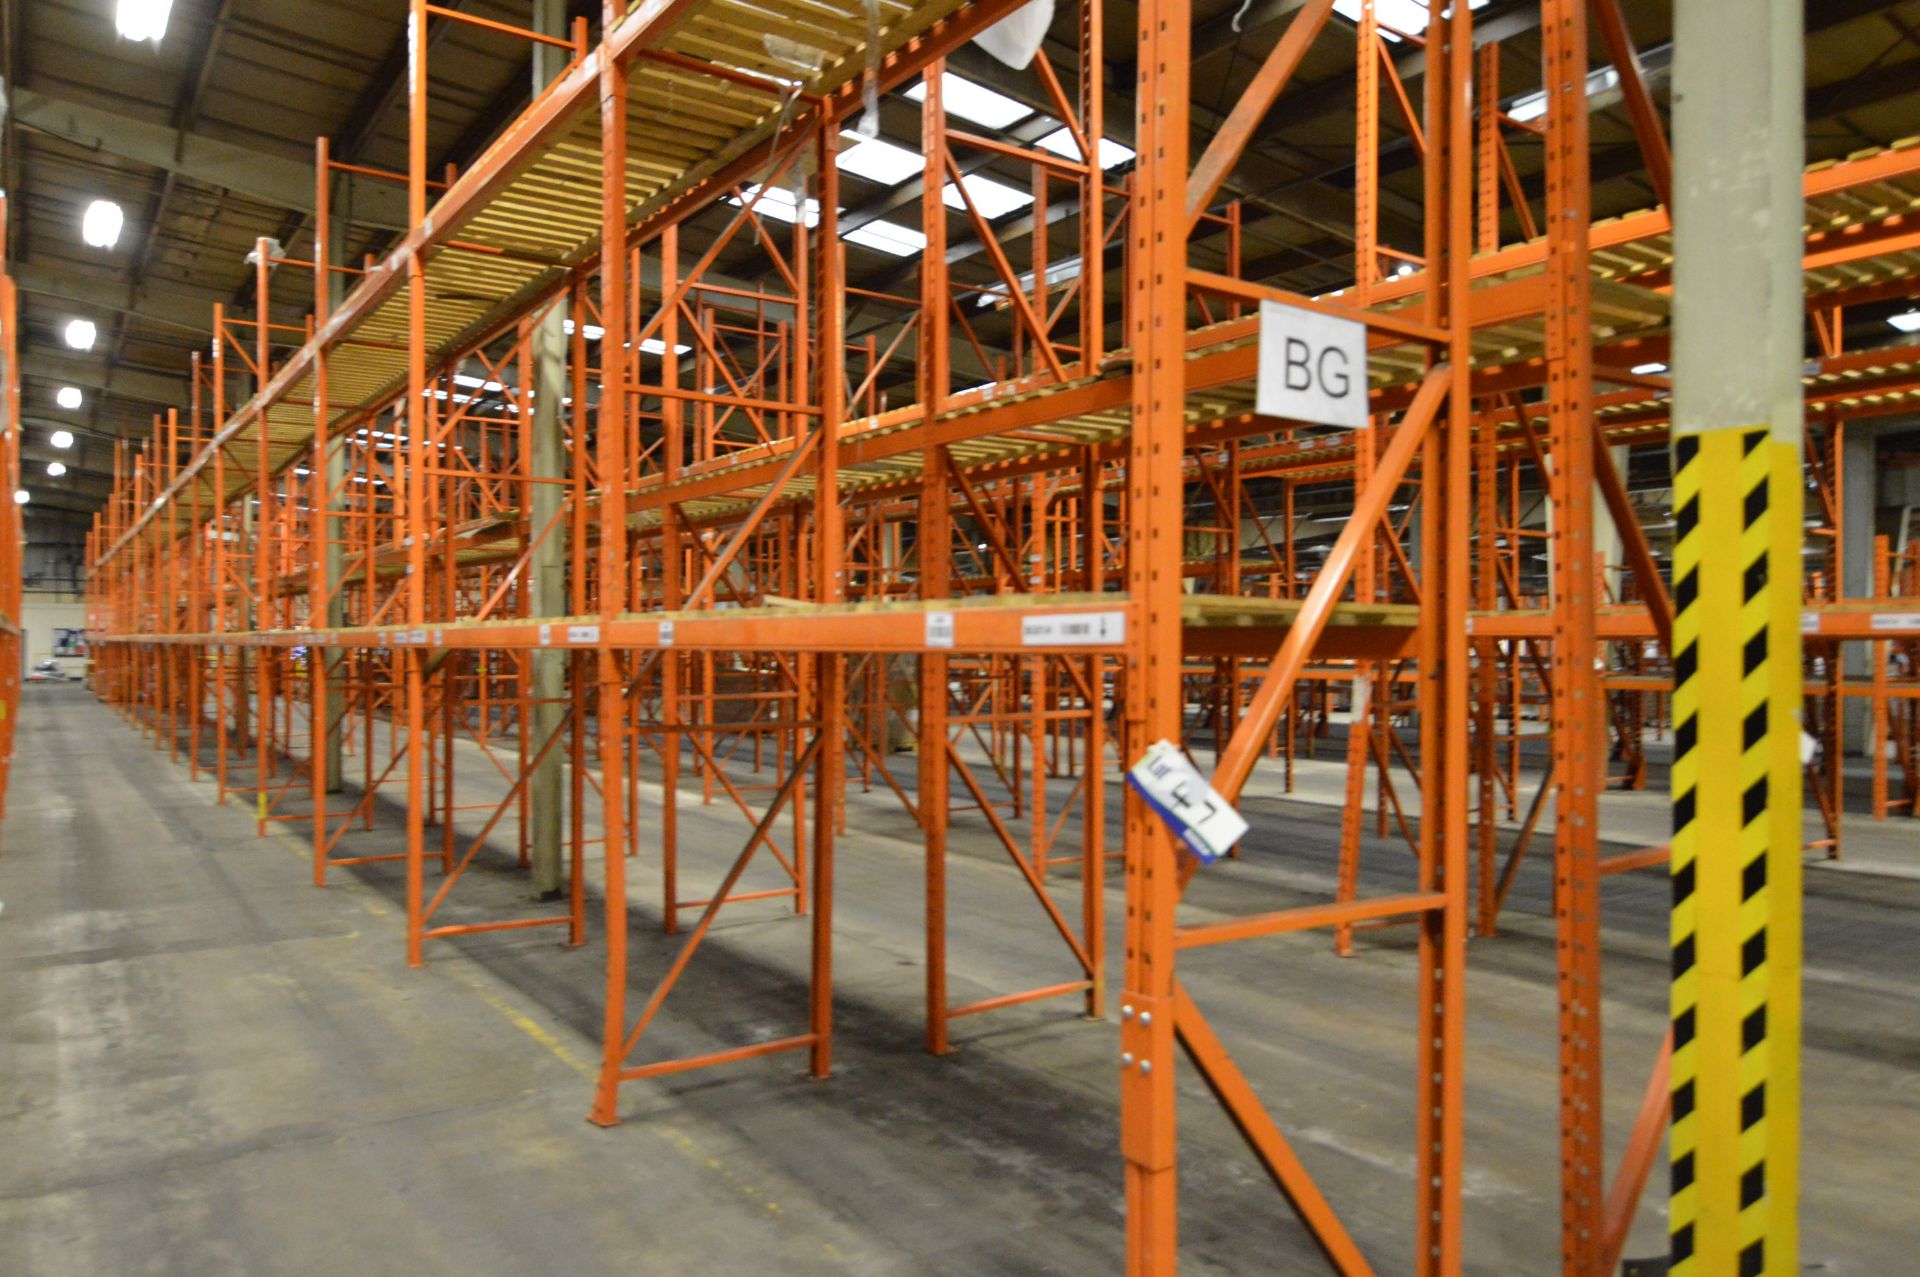 Redirack SD170 SINGLE SIDED 19 BAY TWO TIER PALLET RACK, approx. 52m long x 900mm x mainly 5.1m - Image 2 of 2